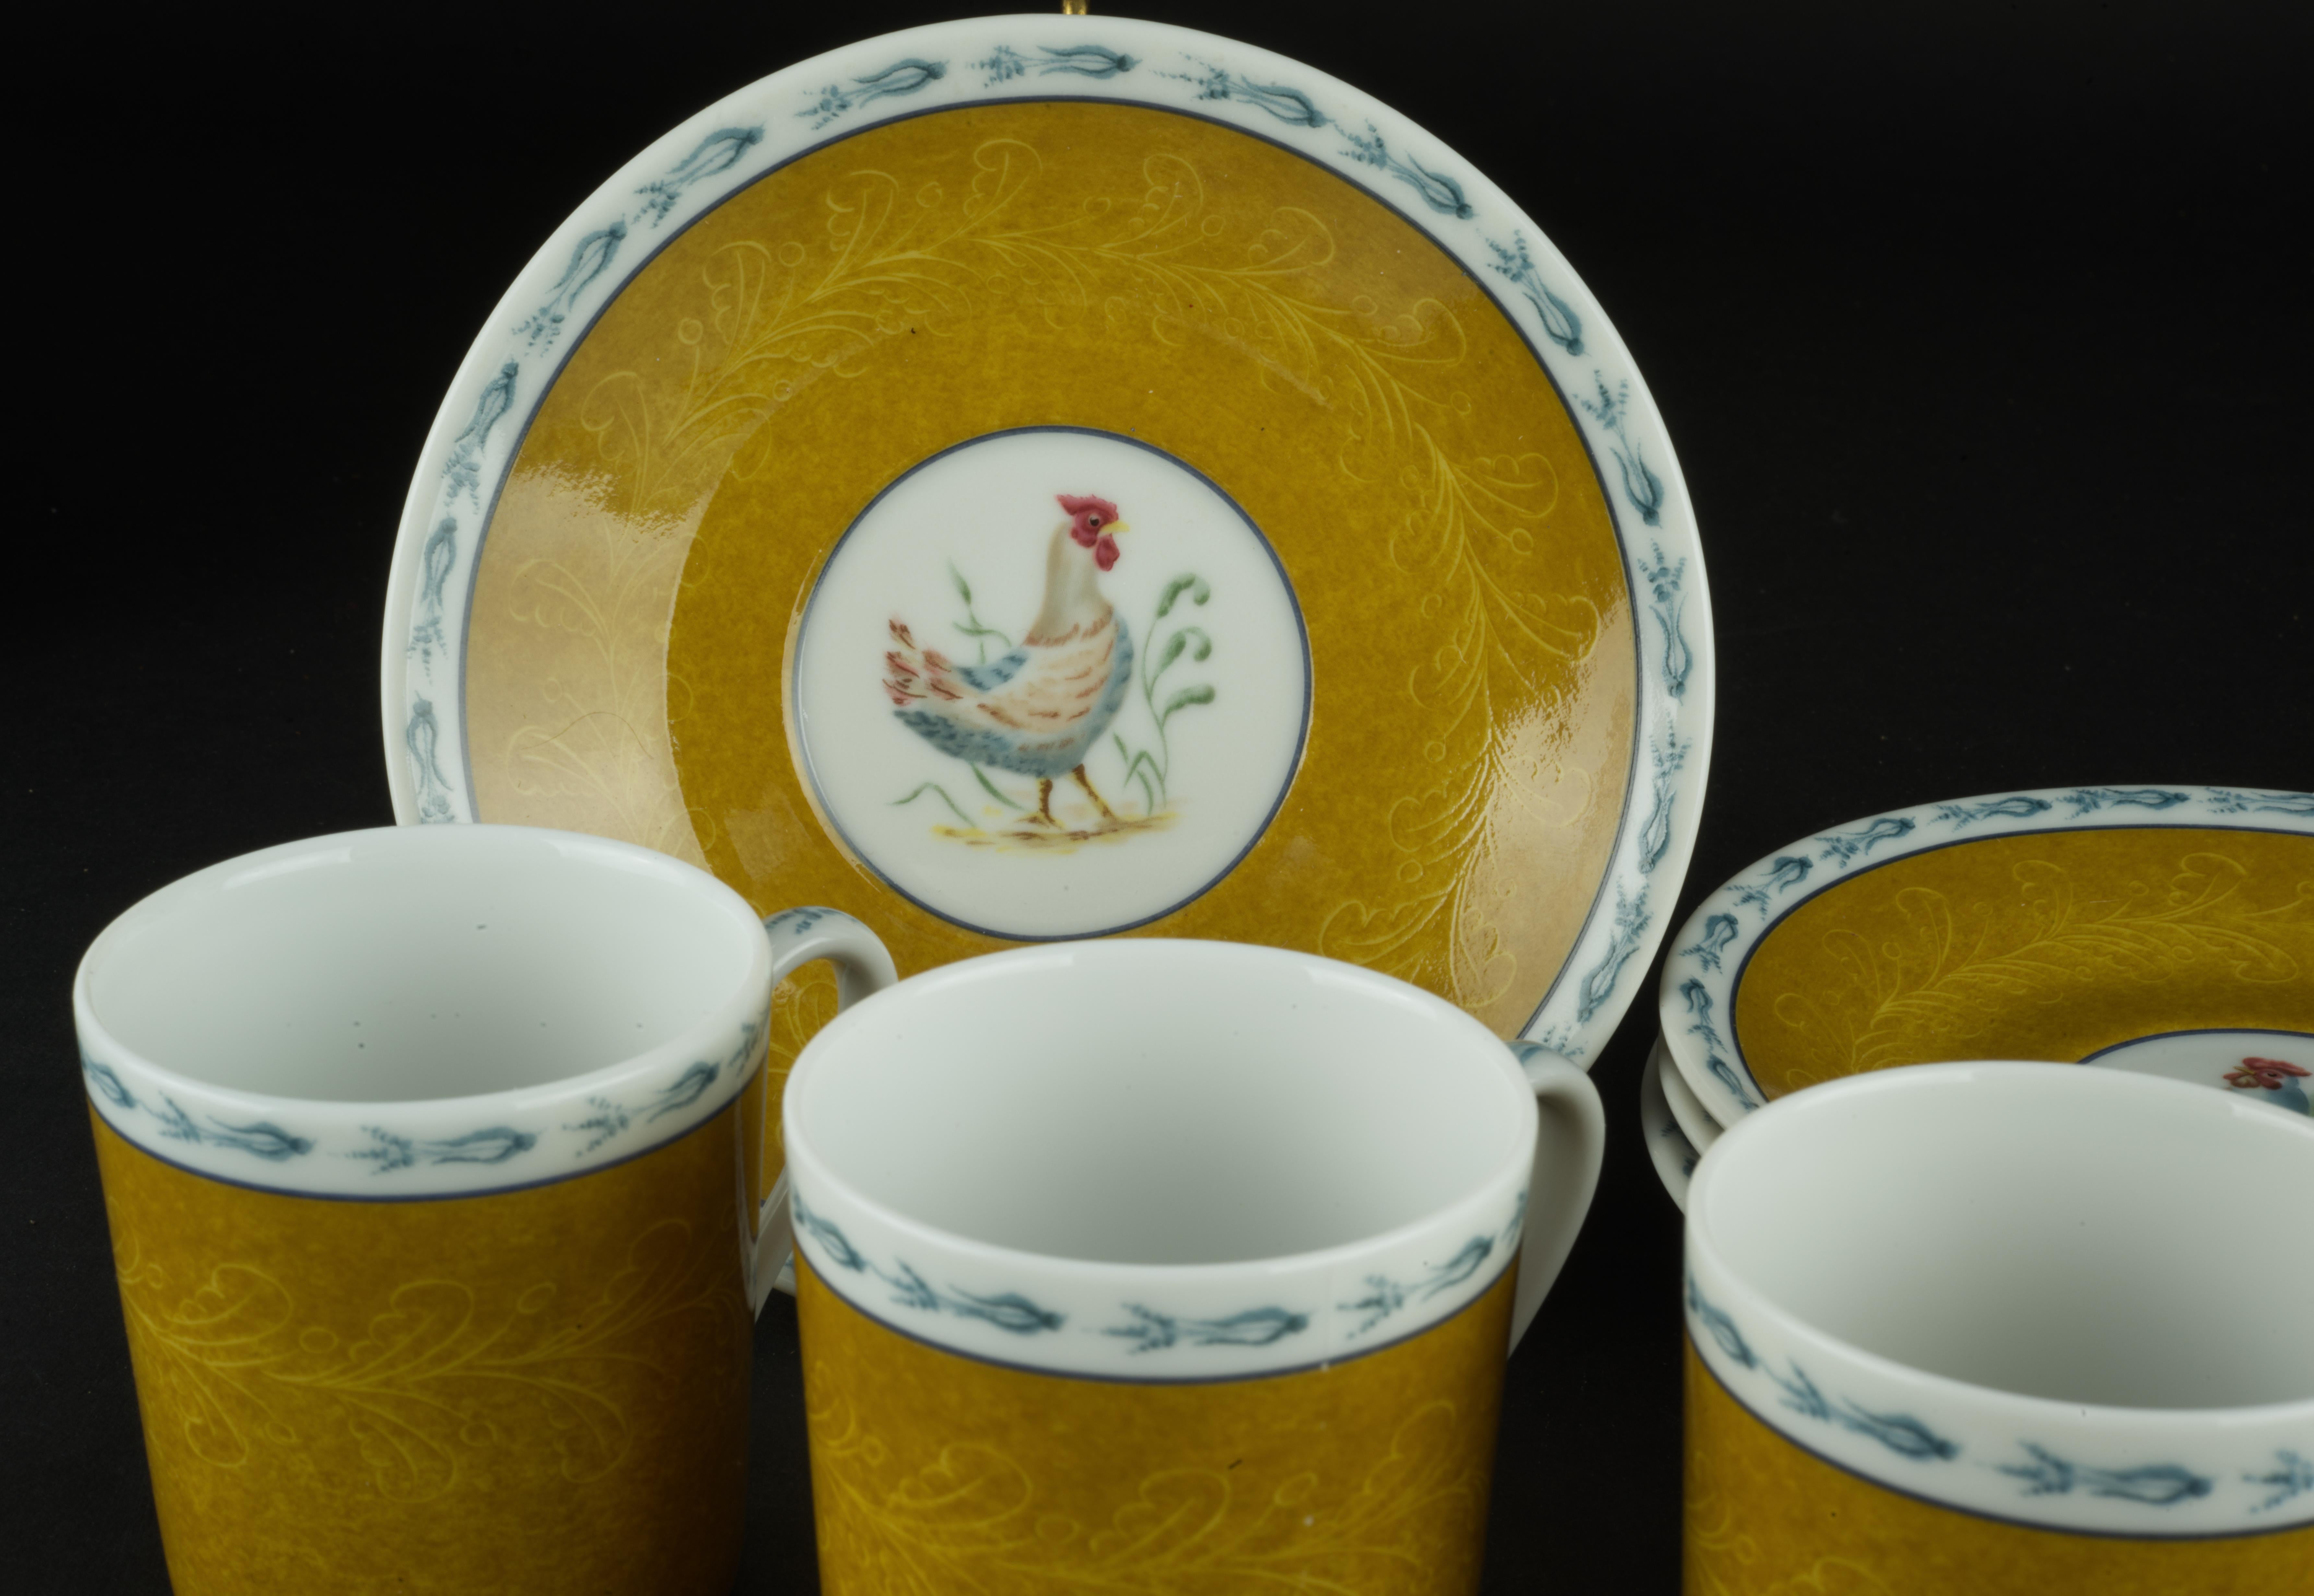 Basse Cour by Pierre Frey set of 4 Demitasse Cups and Saucers, Limoges Porcelain In Excellent Condition For Sale In Clifton Springs, NY